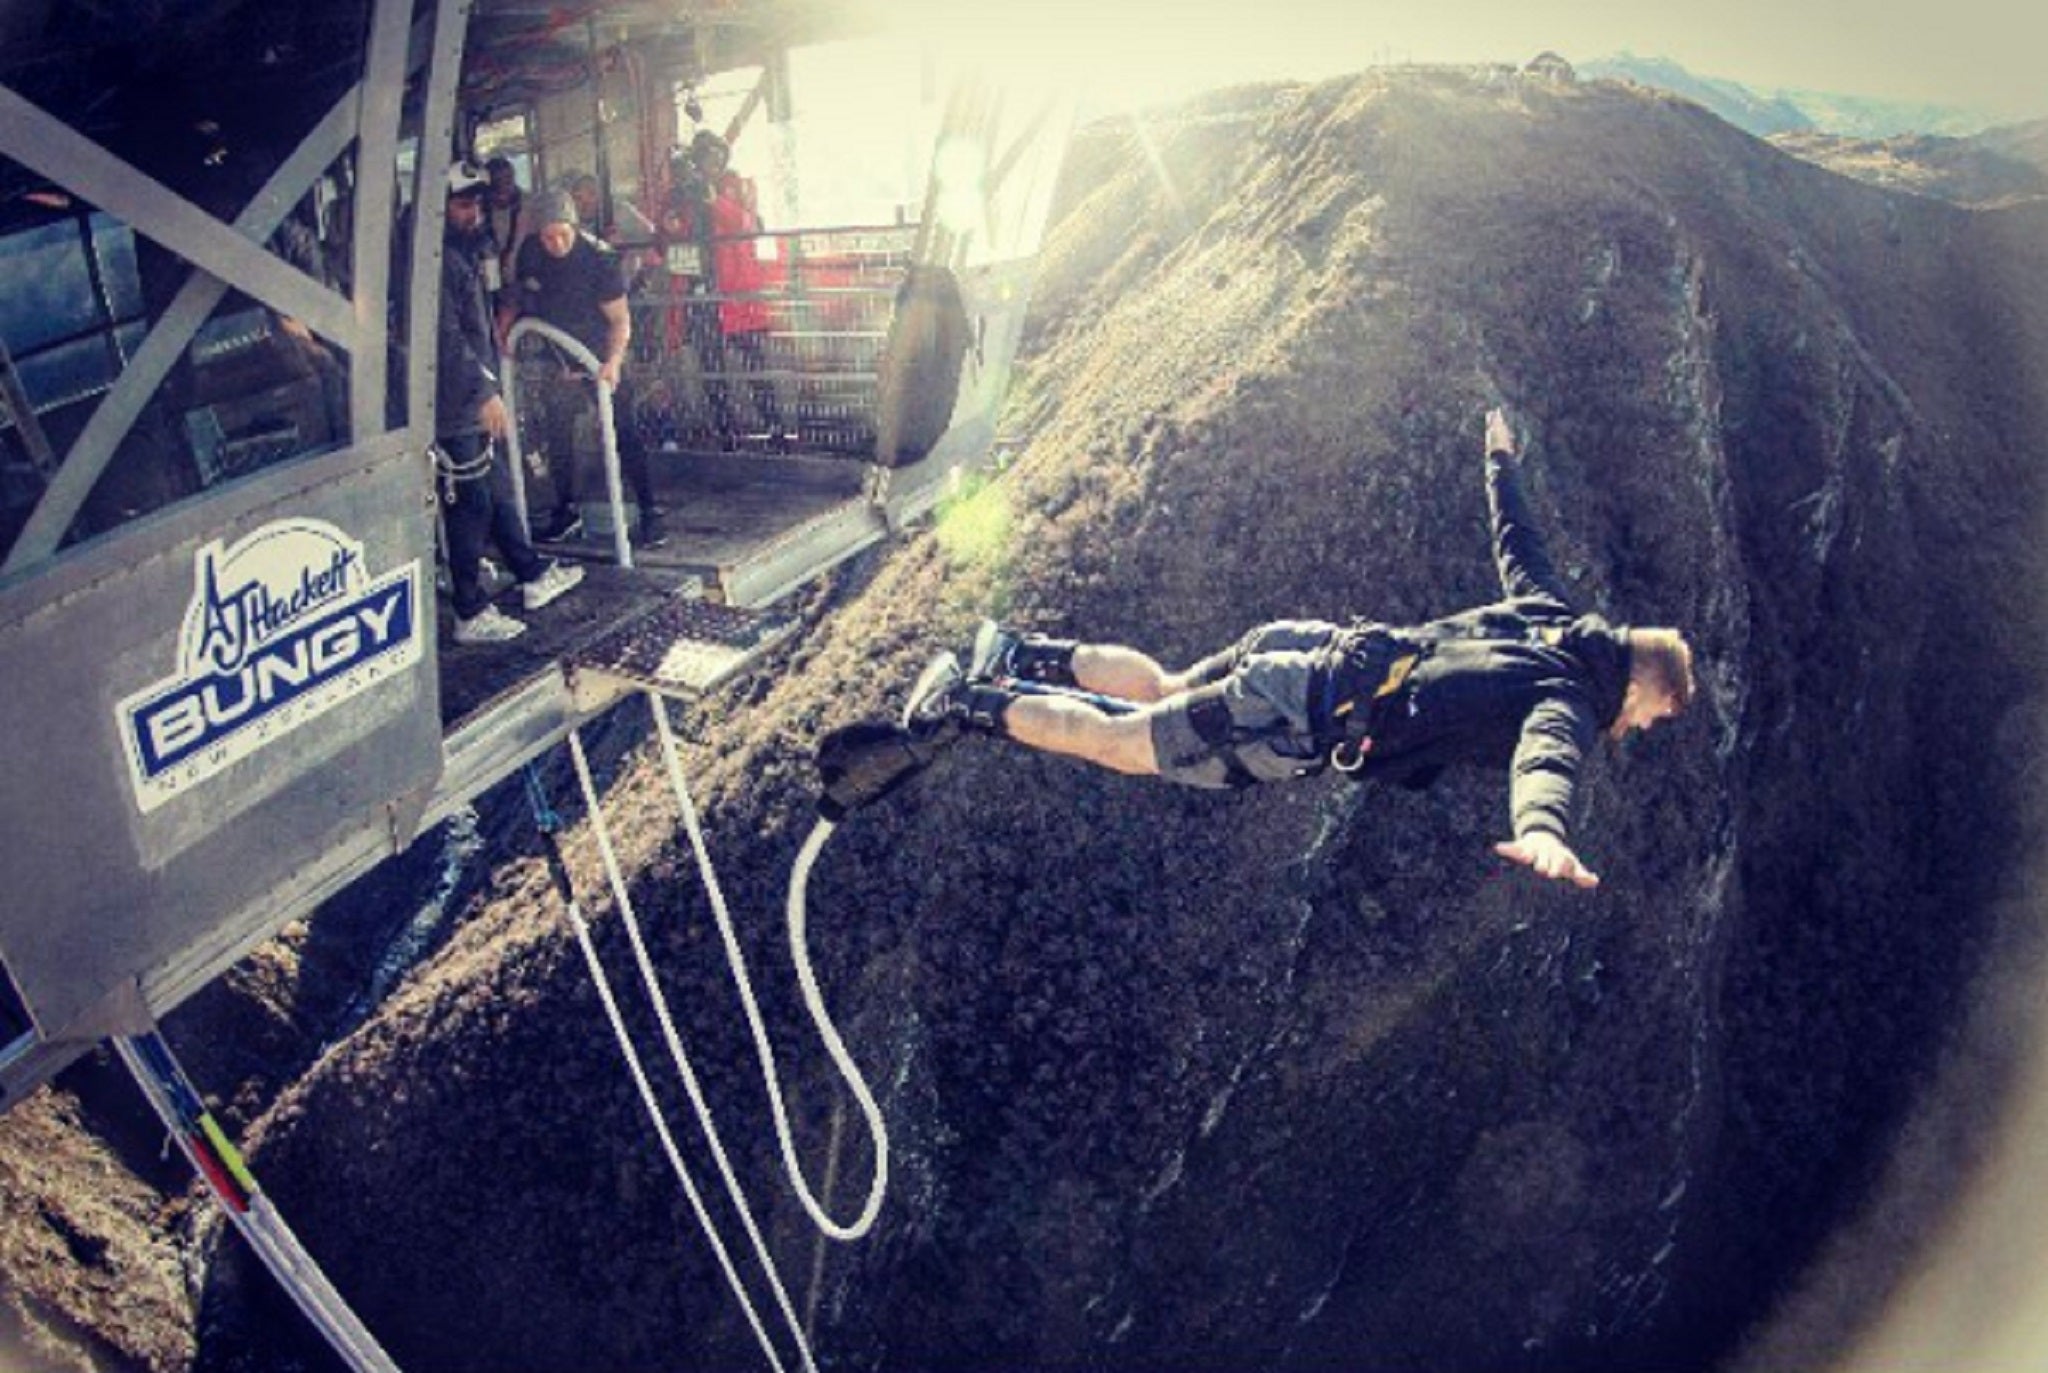 George Kruis joined Jack Nowell and Taulupe Faletau for a bungee jump in Queenstown